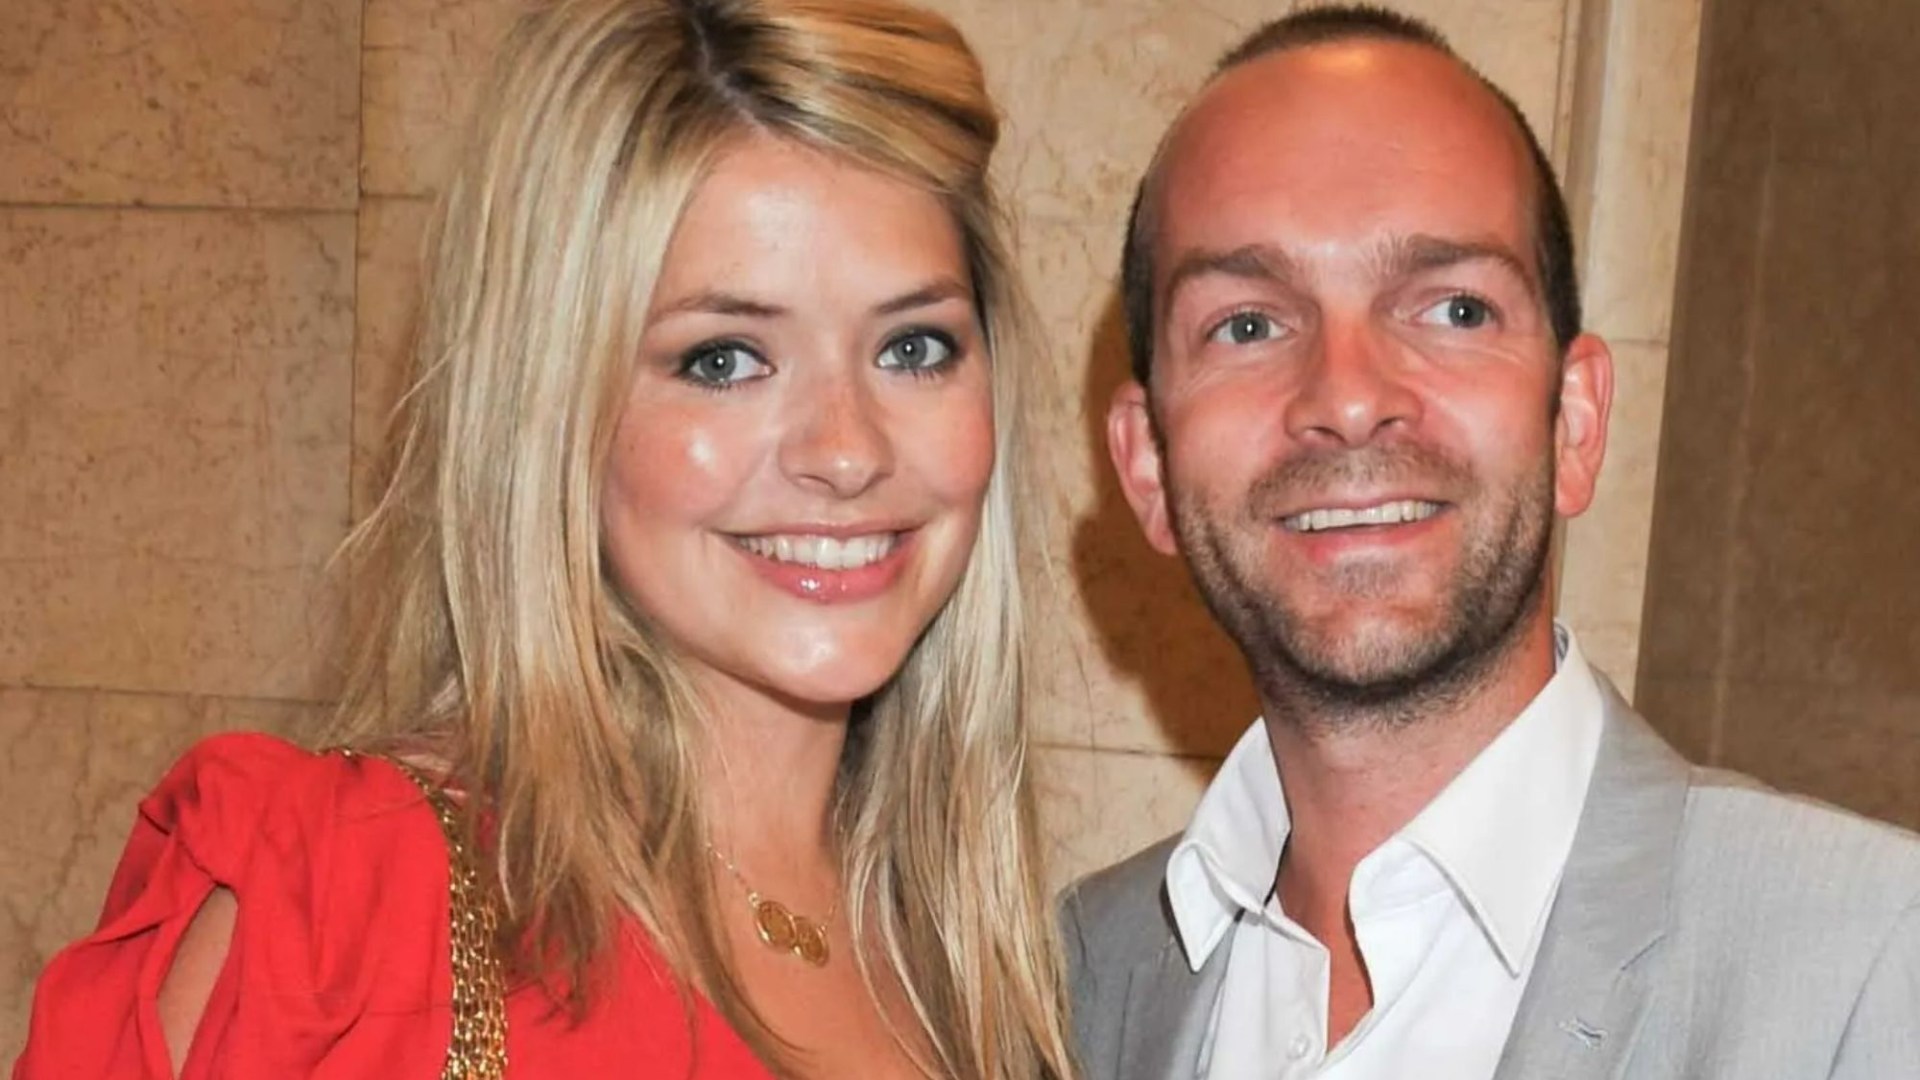 Holly Willoughby Spills the Tea: From Not Fancying Her Husband to Kinky Bedroom Games